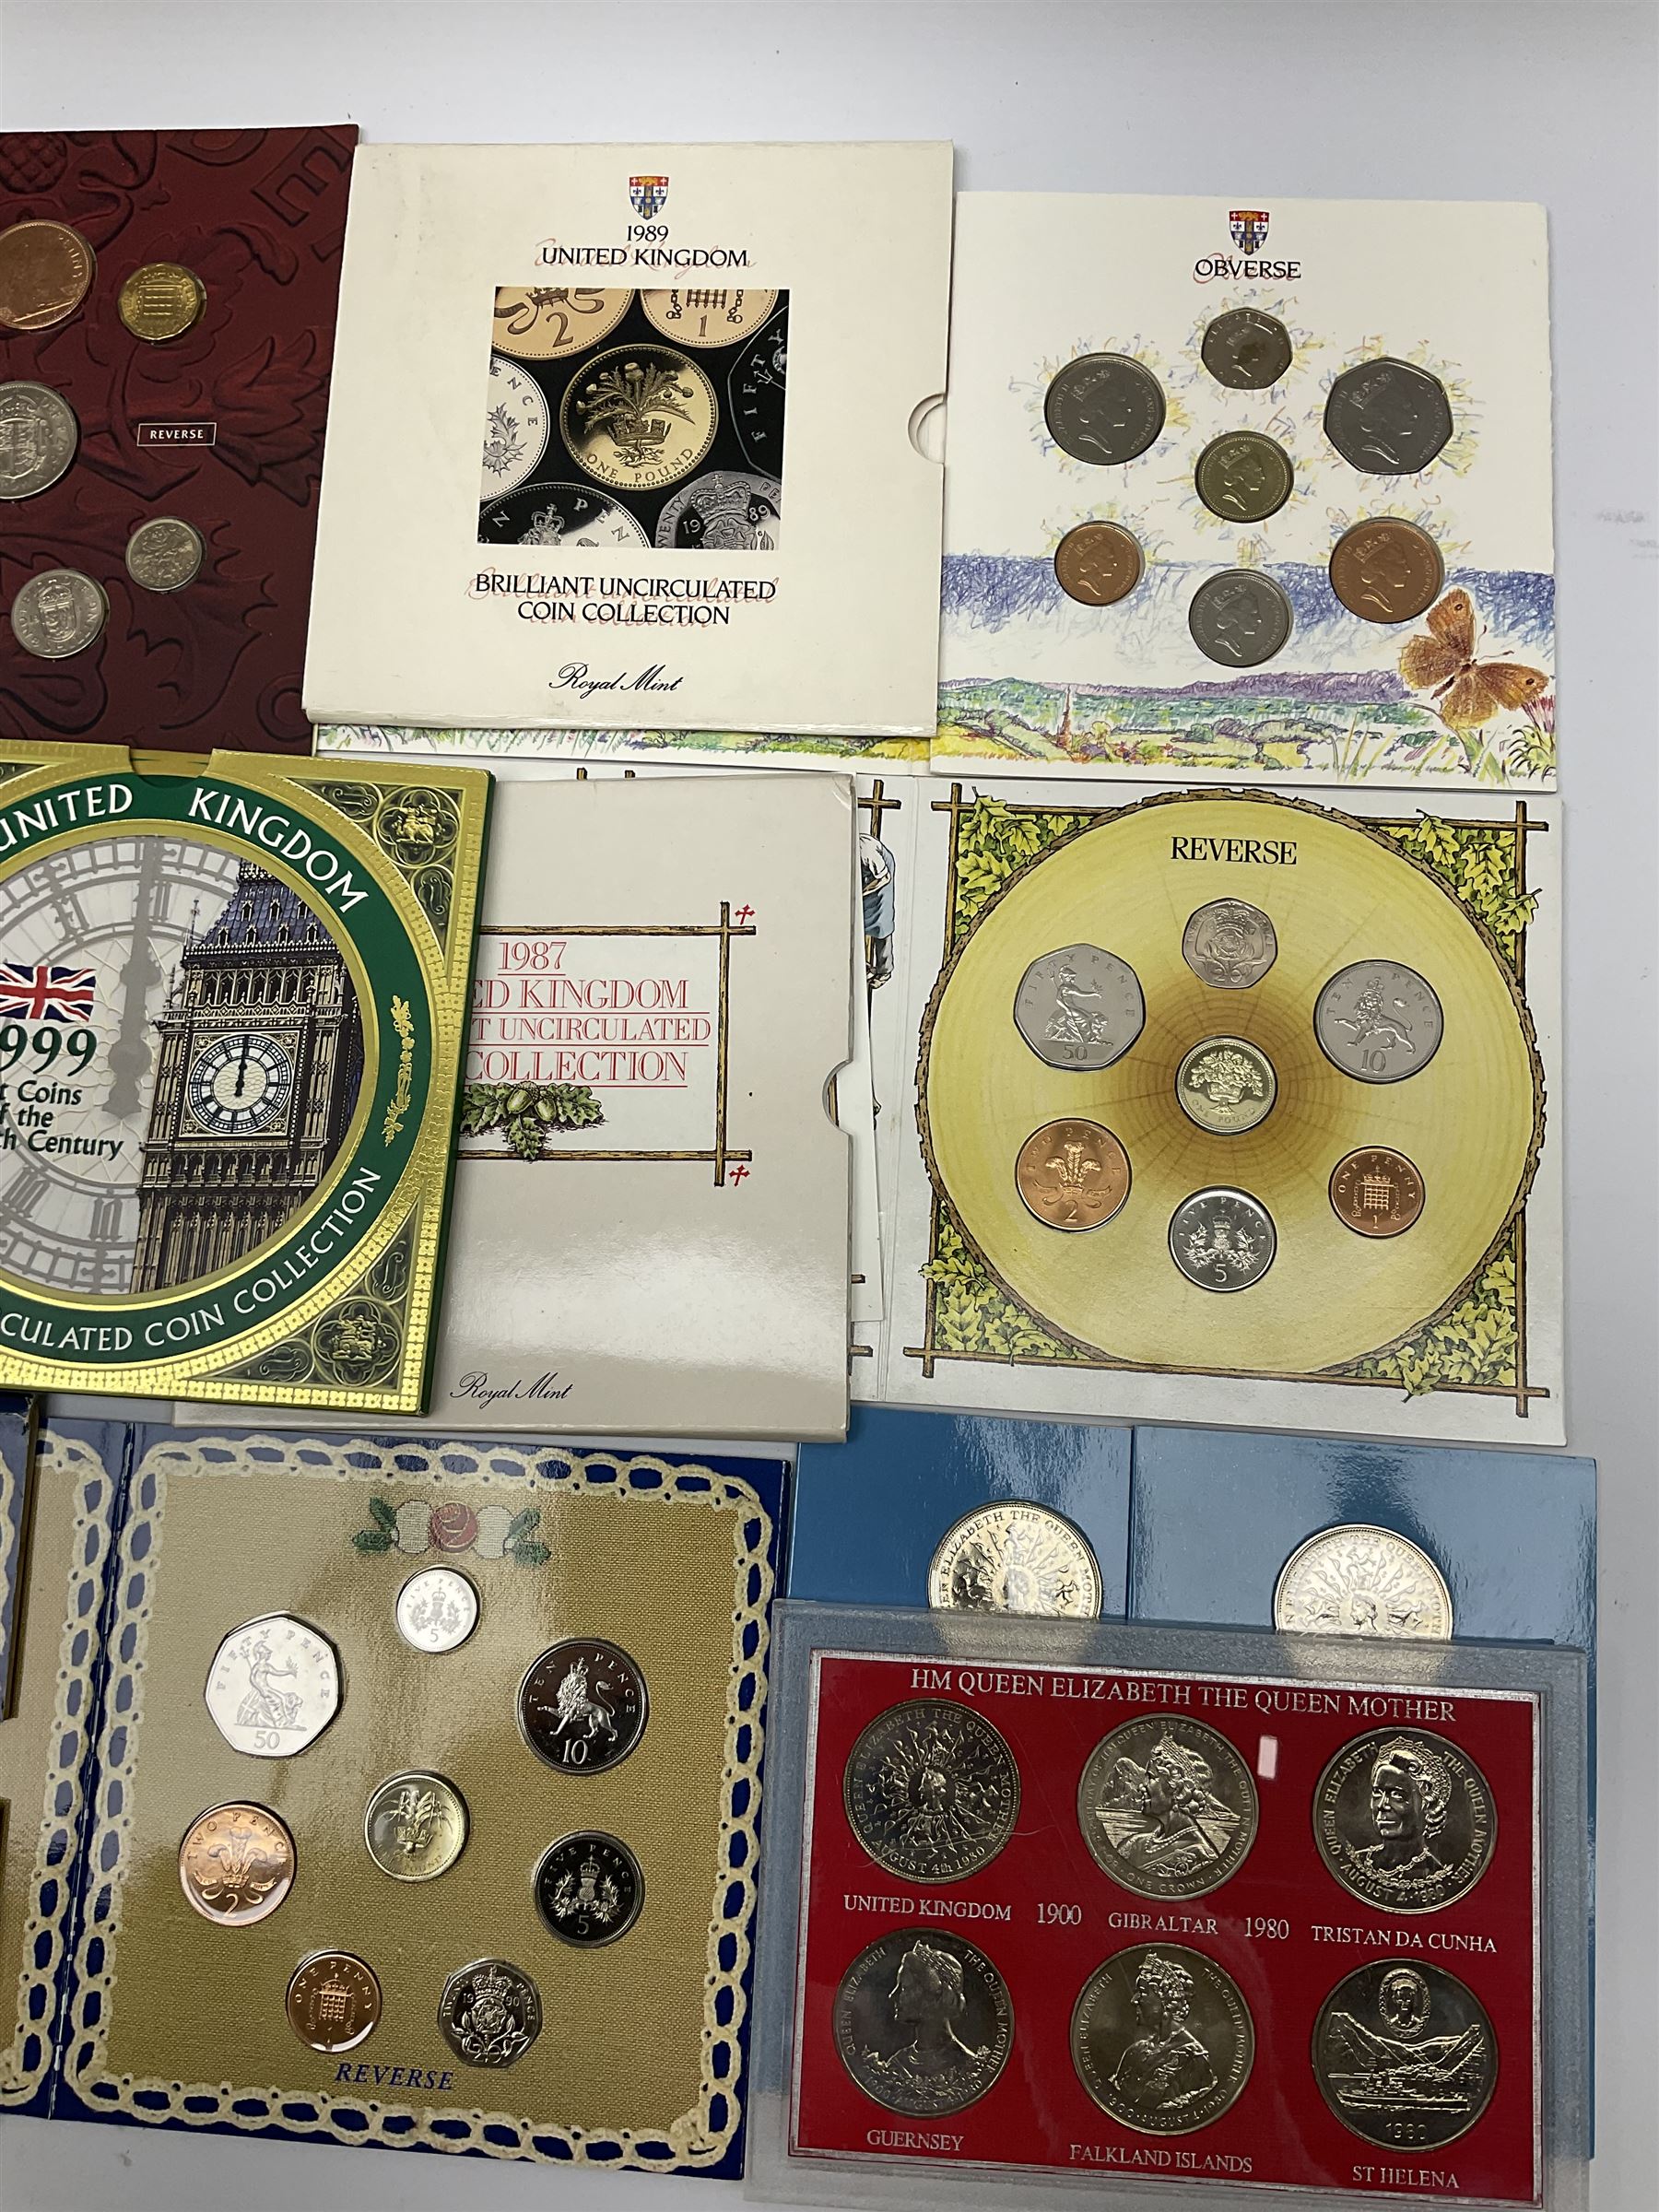 United Kingdom brilliant uncirculated coin collections dated 1987 - Image 2 of 4